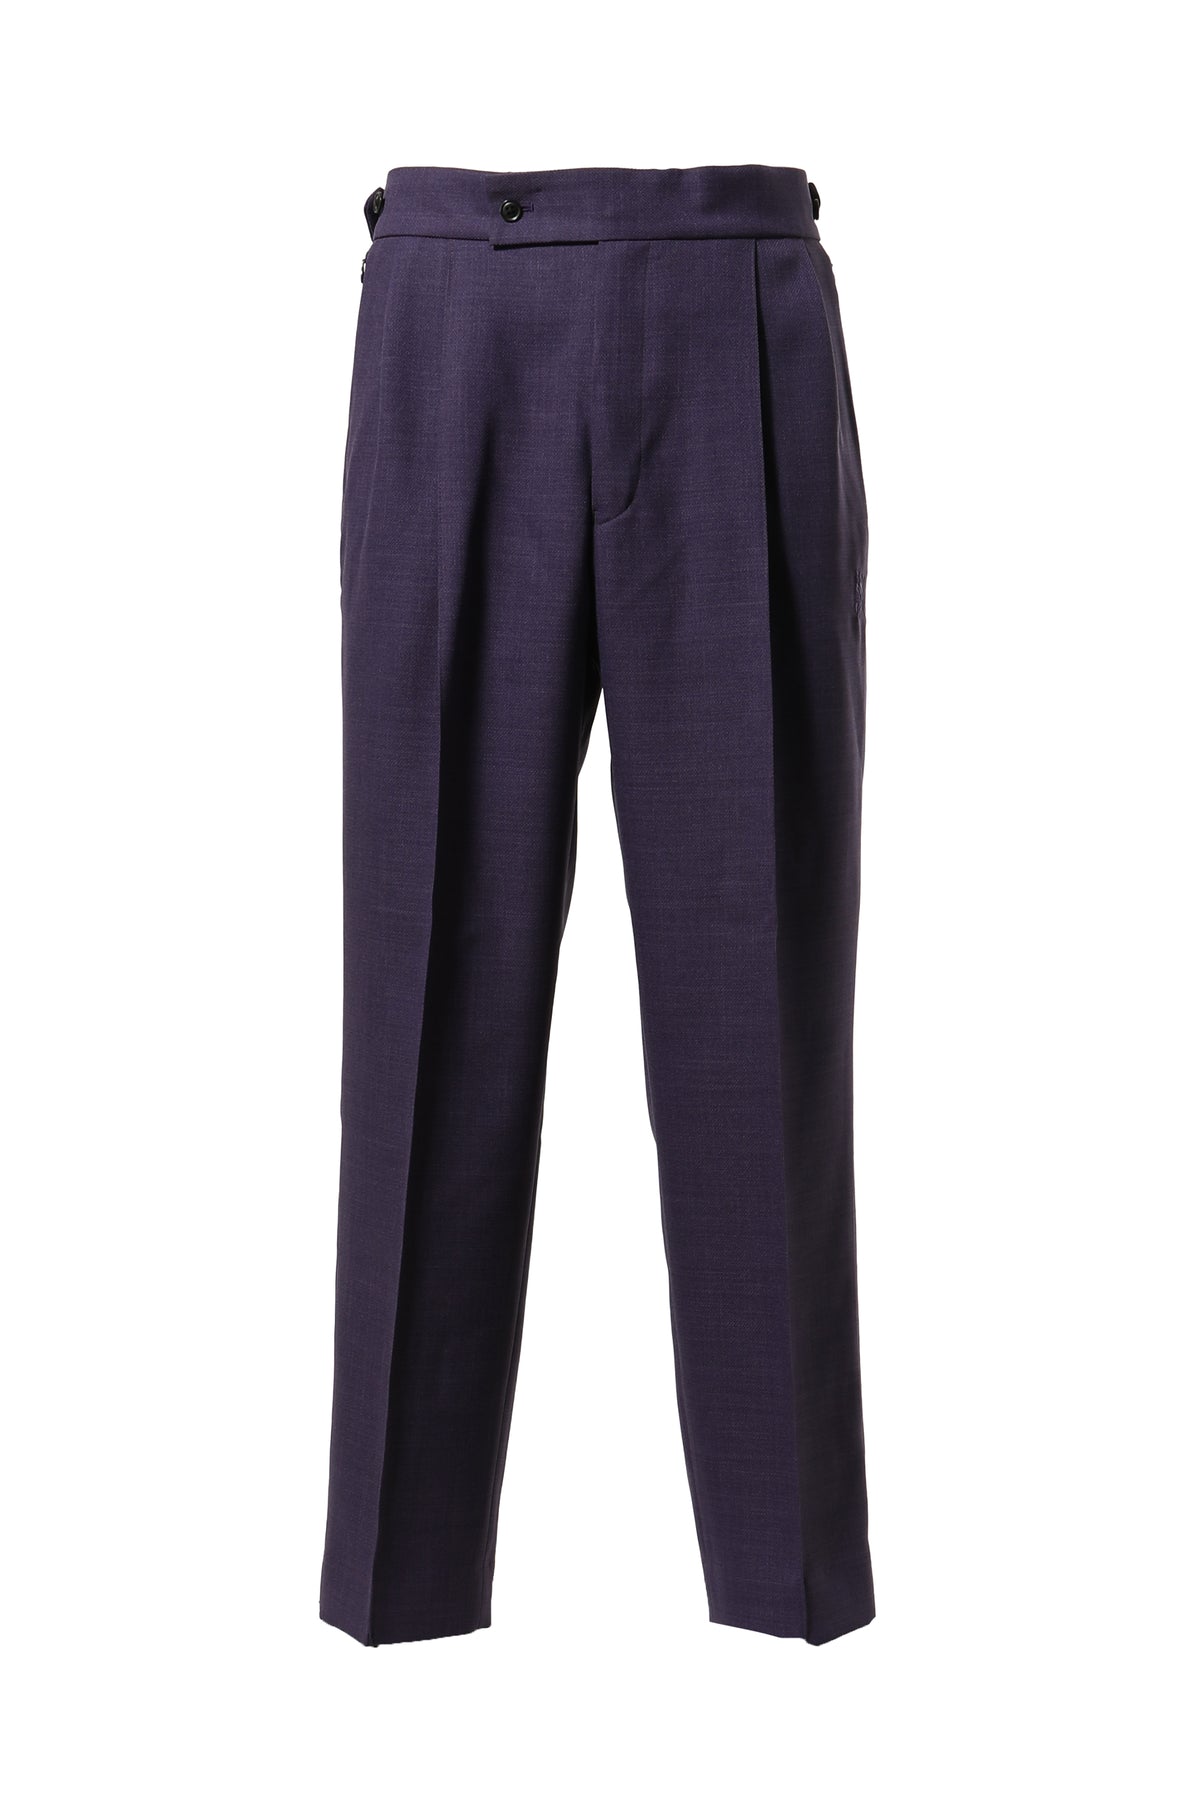 TUCKED SIDE TAB TROUSER - POLY DOBBY CLOTH / PUR